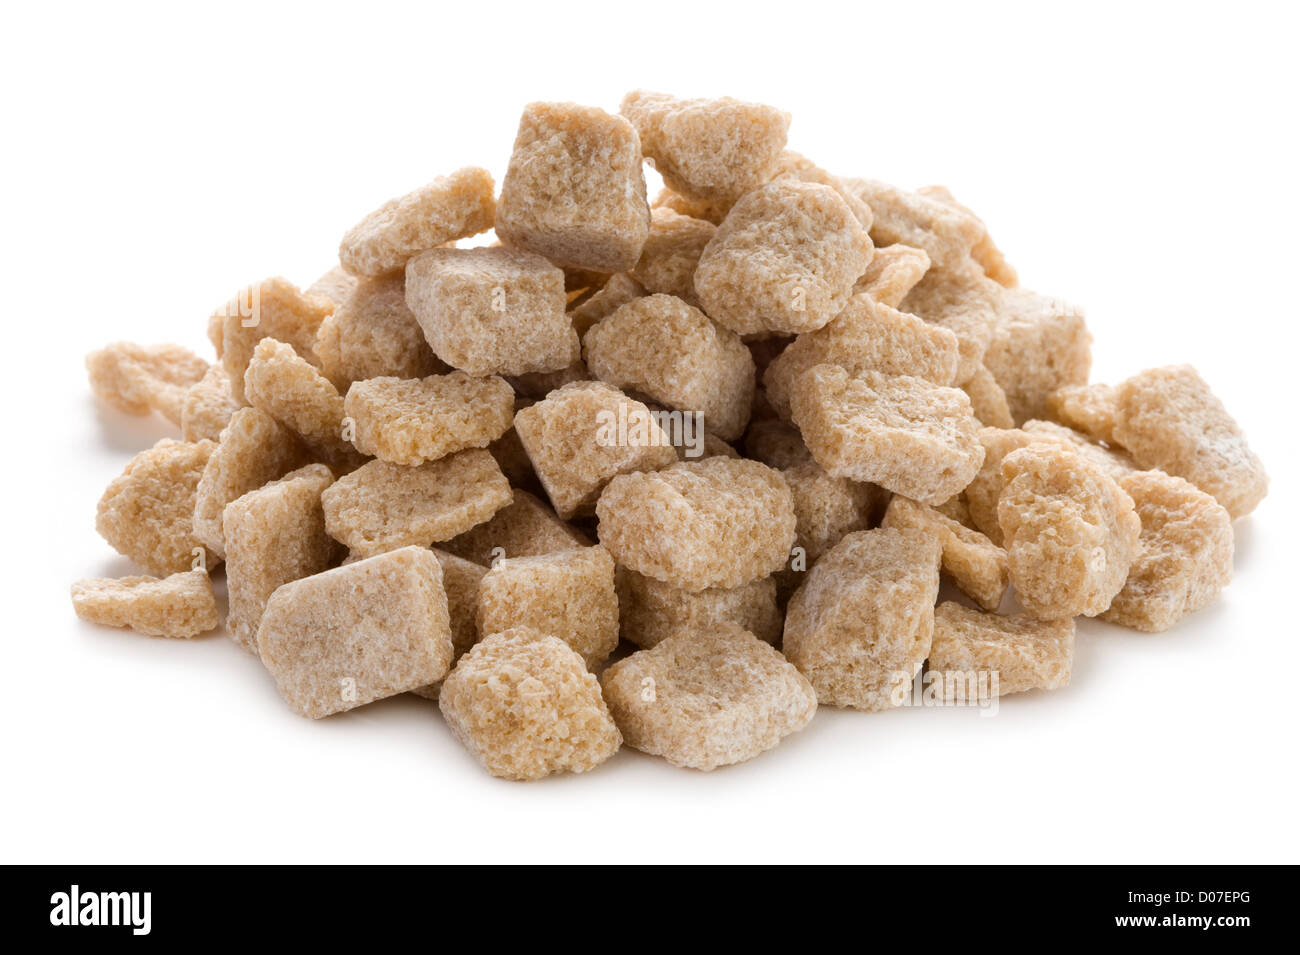 rough cut brown demerara sugar cubes isolated on white background Stock Photo